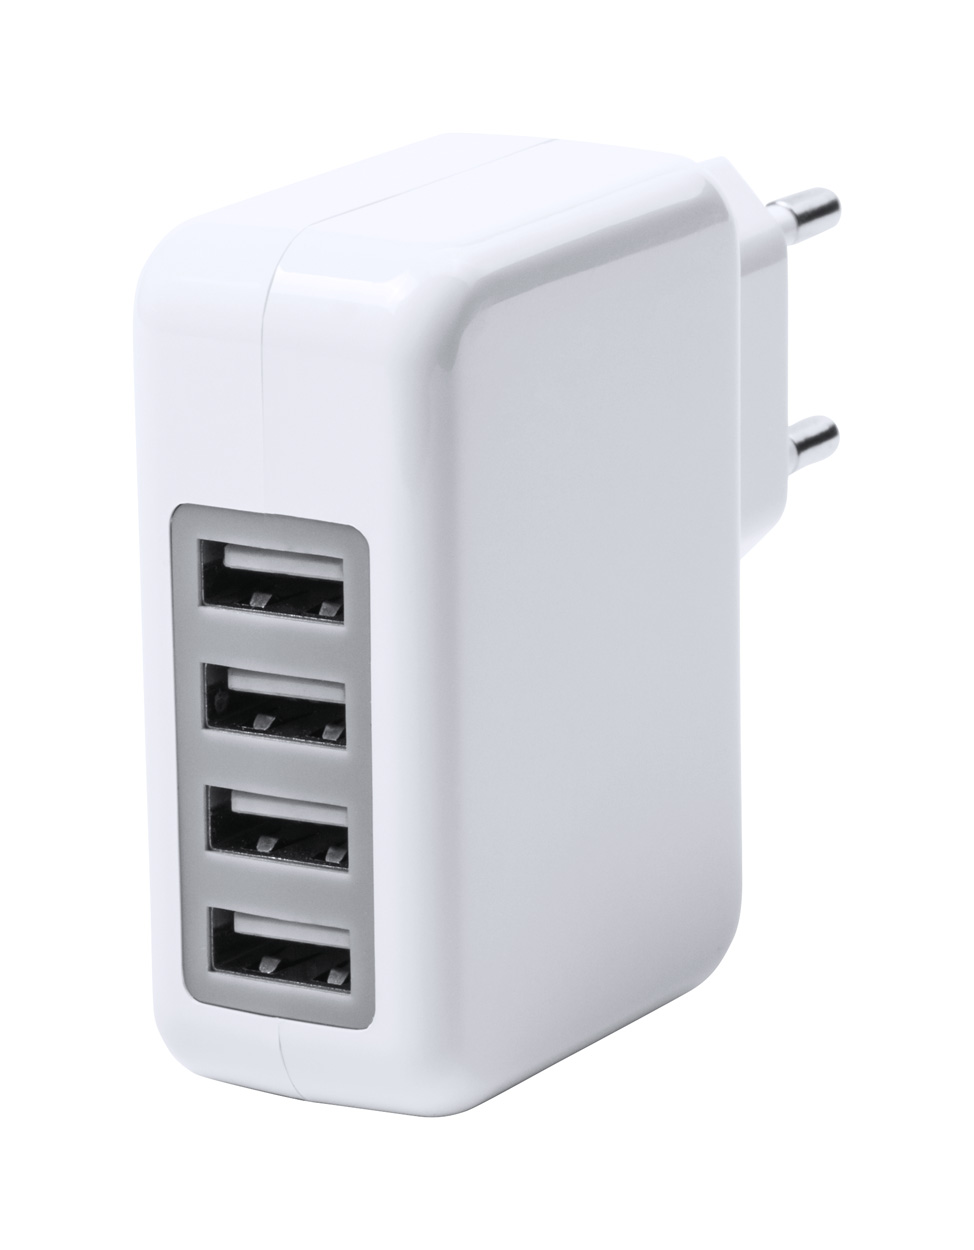 Plastic USB charger to the socket GREGOR II - white / grey